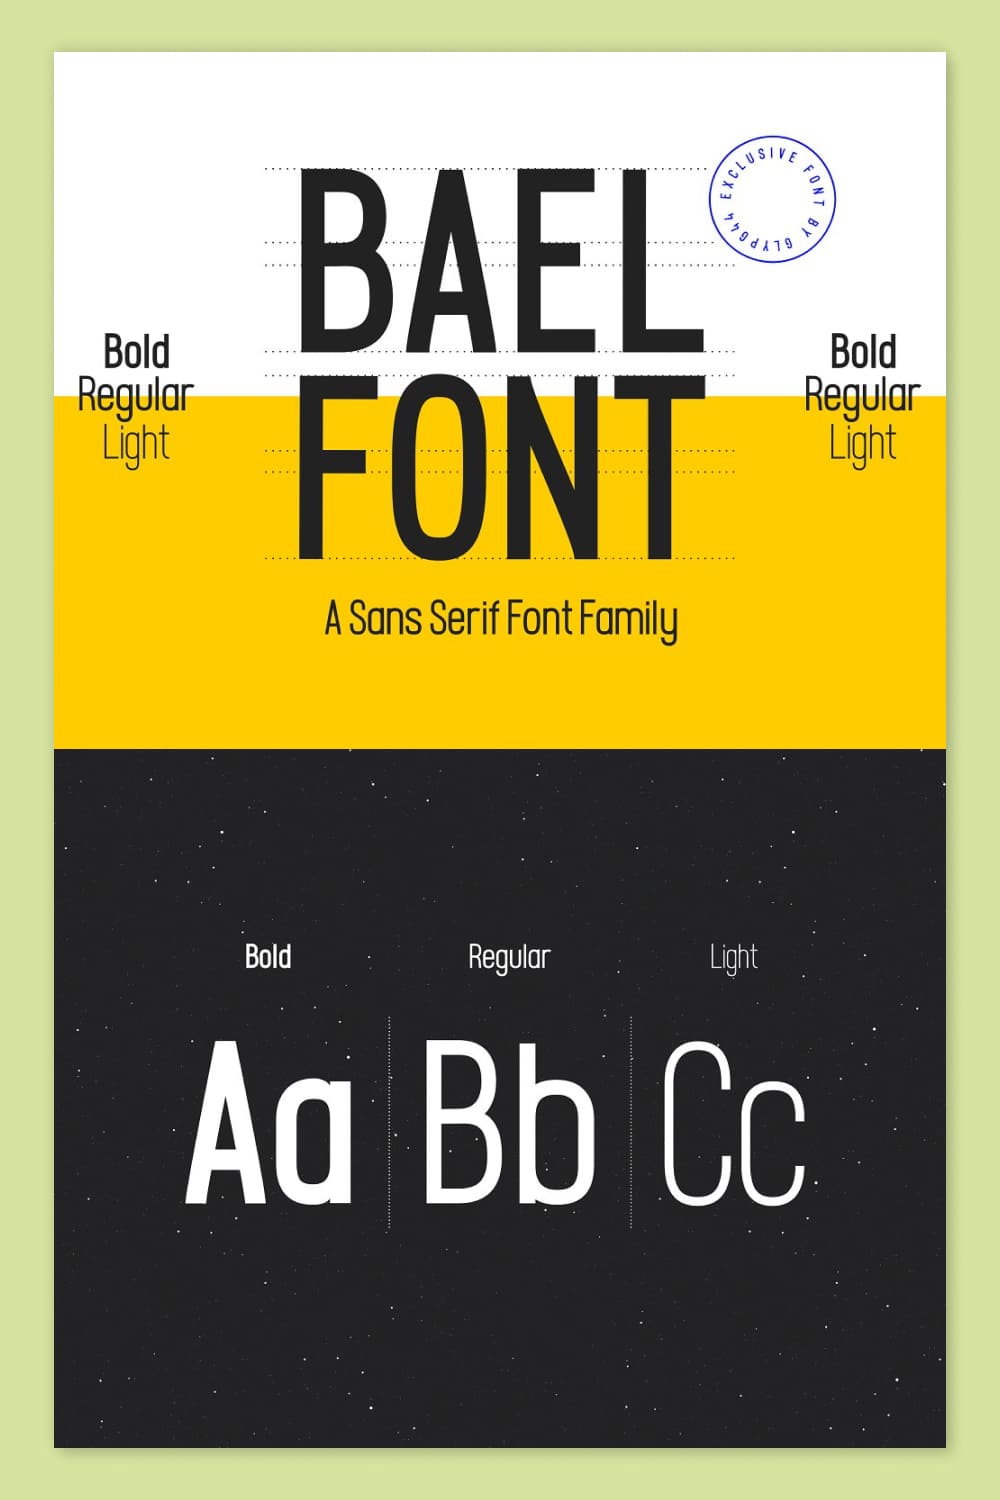 An example of a Bael Font Family on a white, yellow and black background.